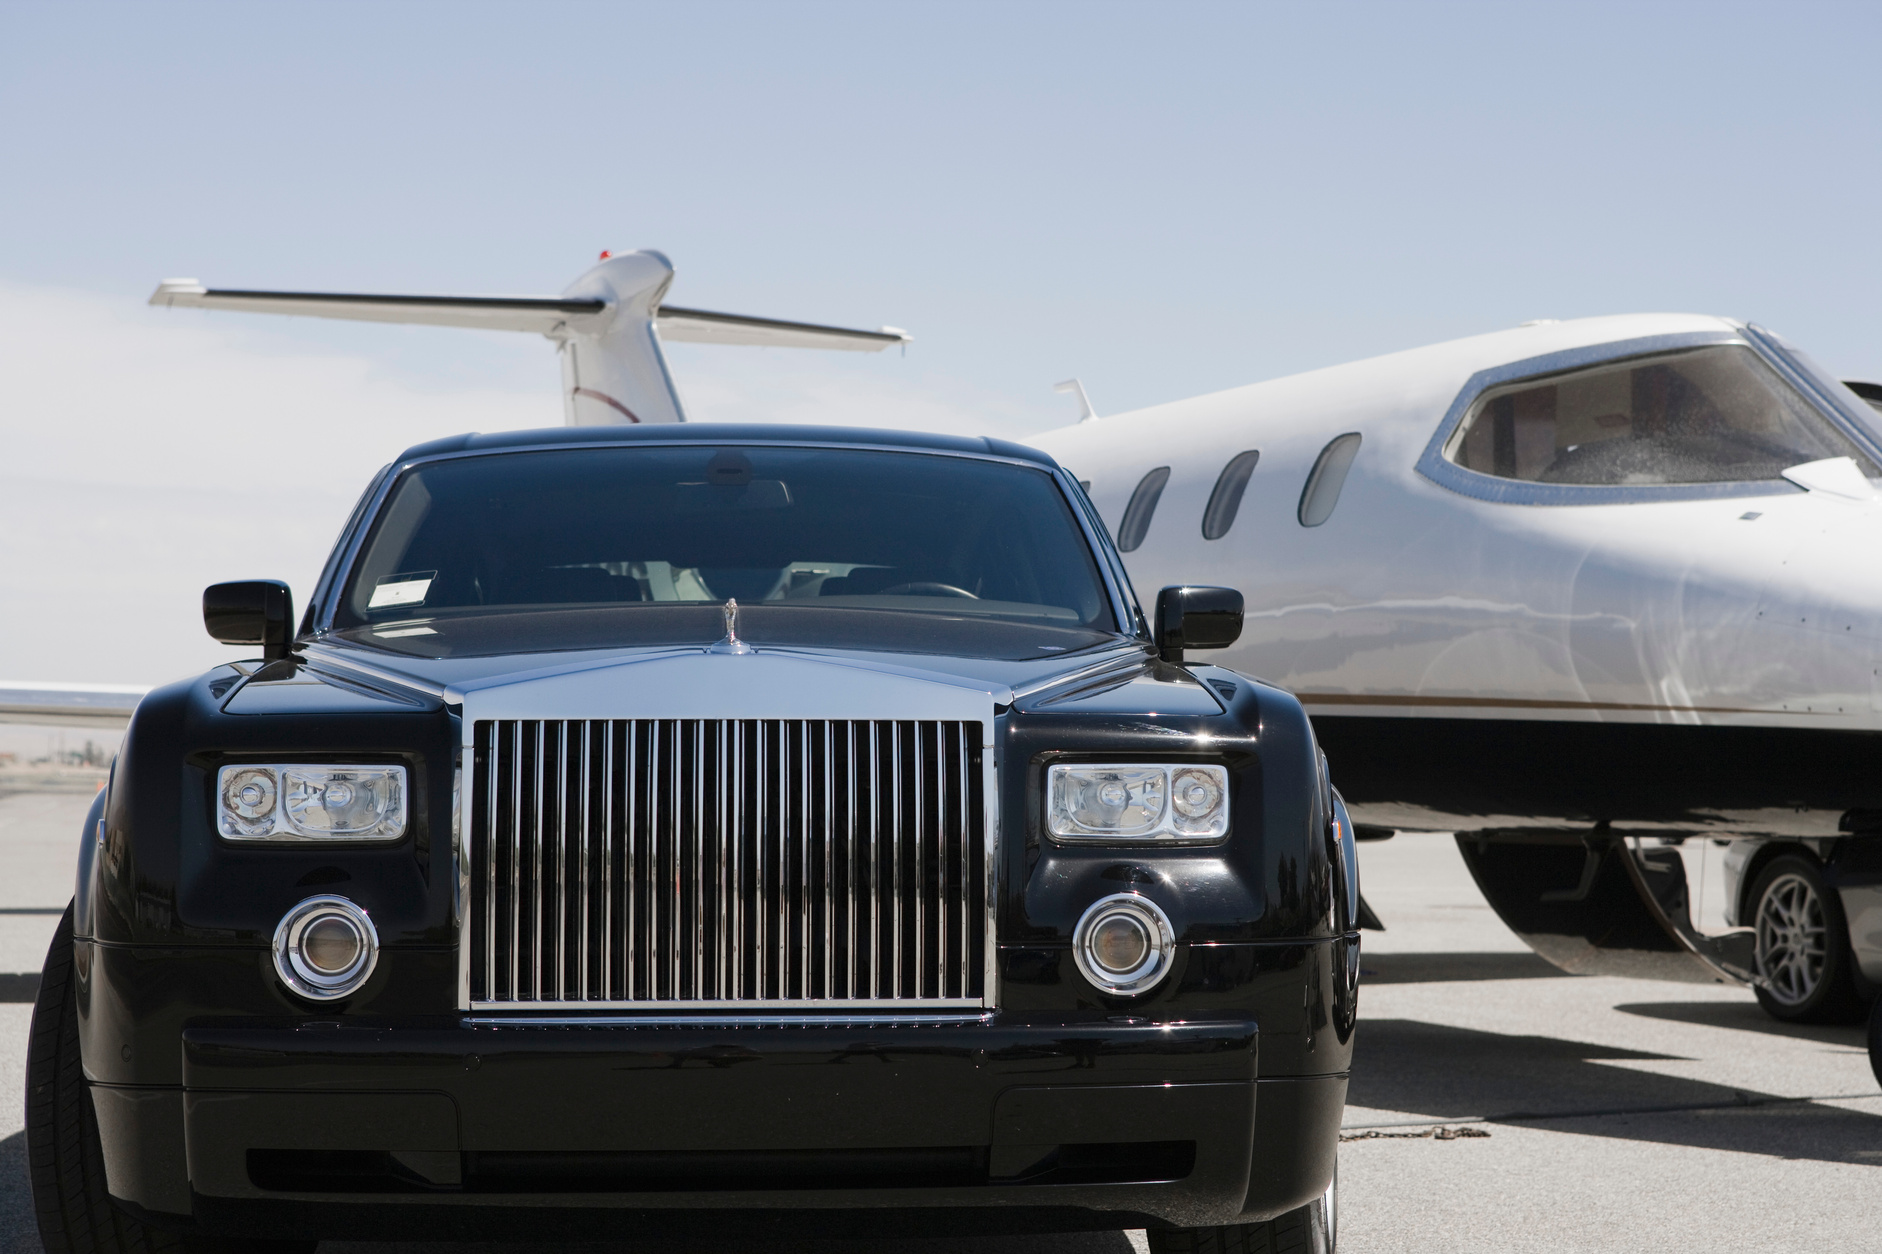 limousine and private jet on landing strip.